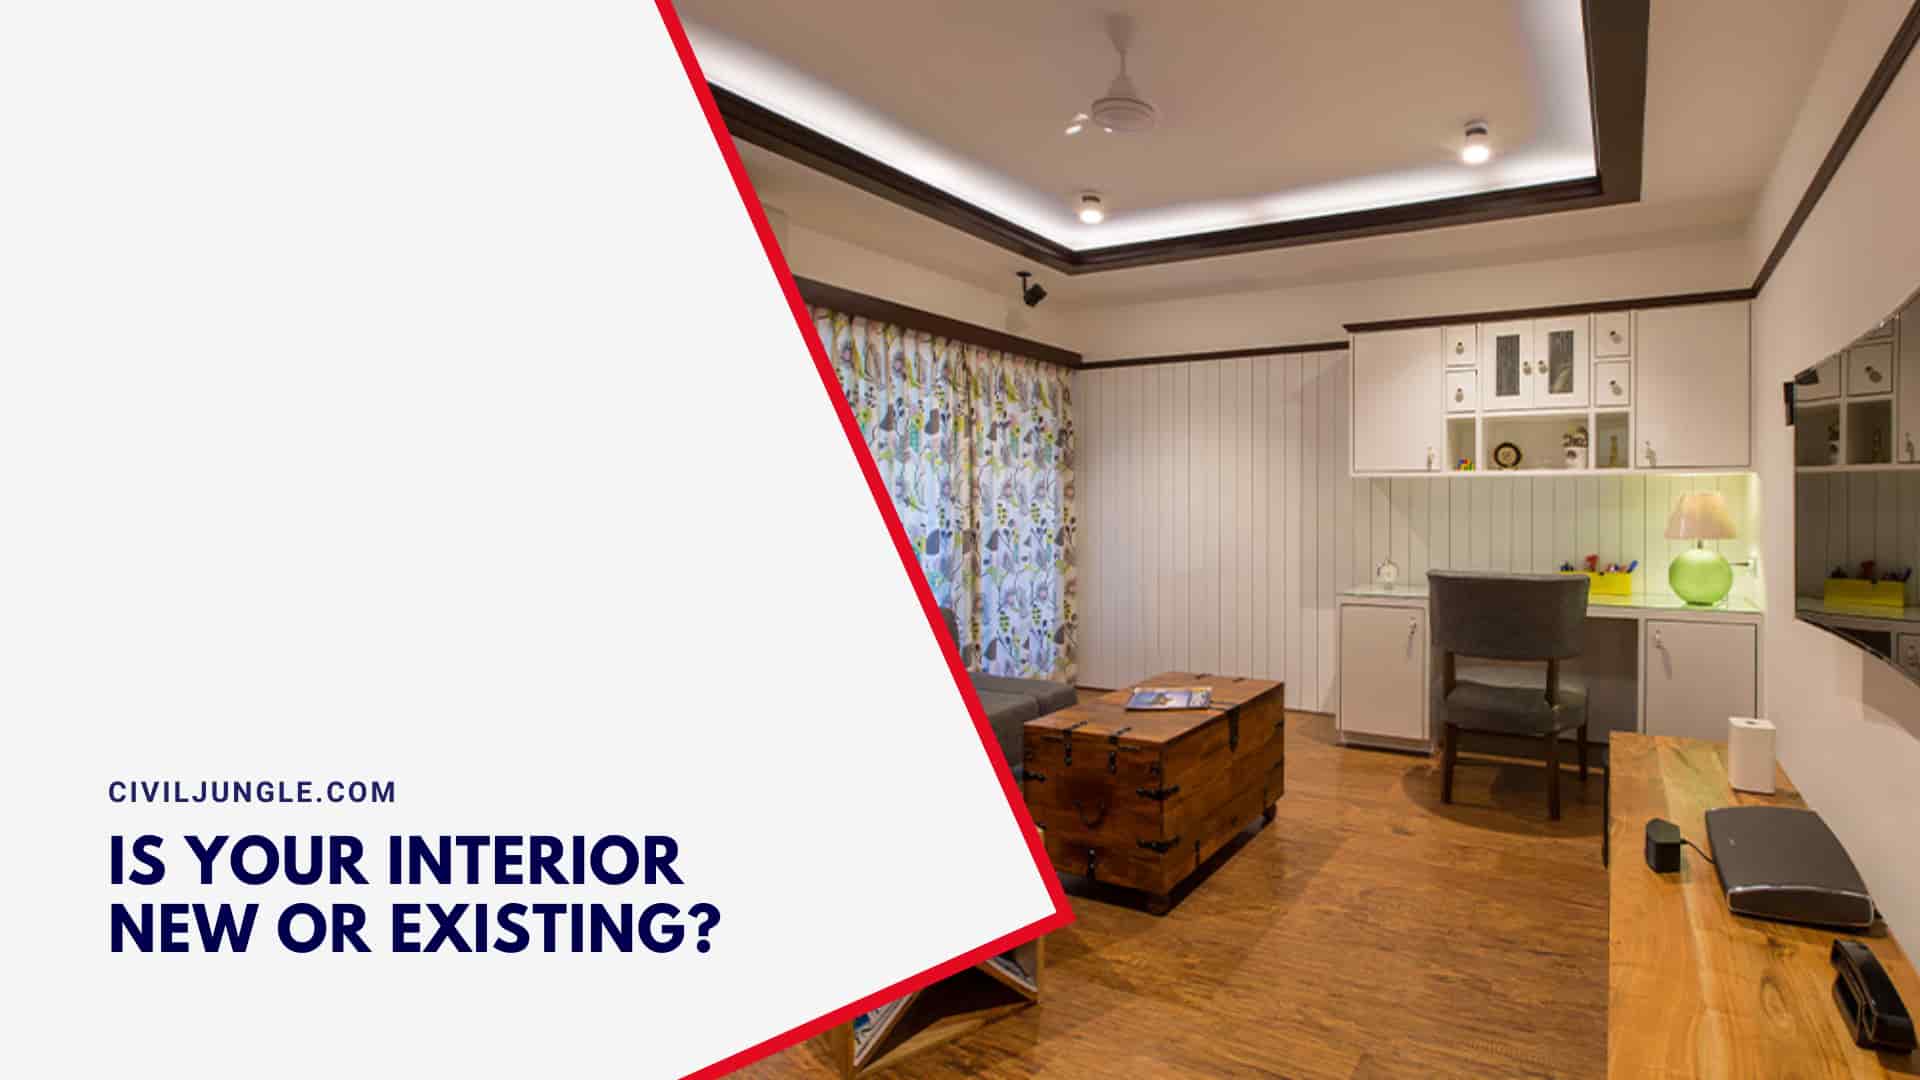 Is Your Interior New or Existing?